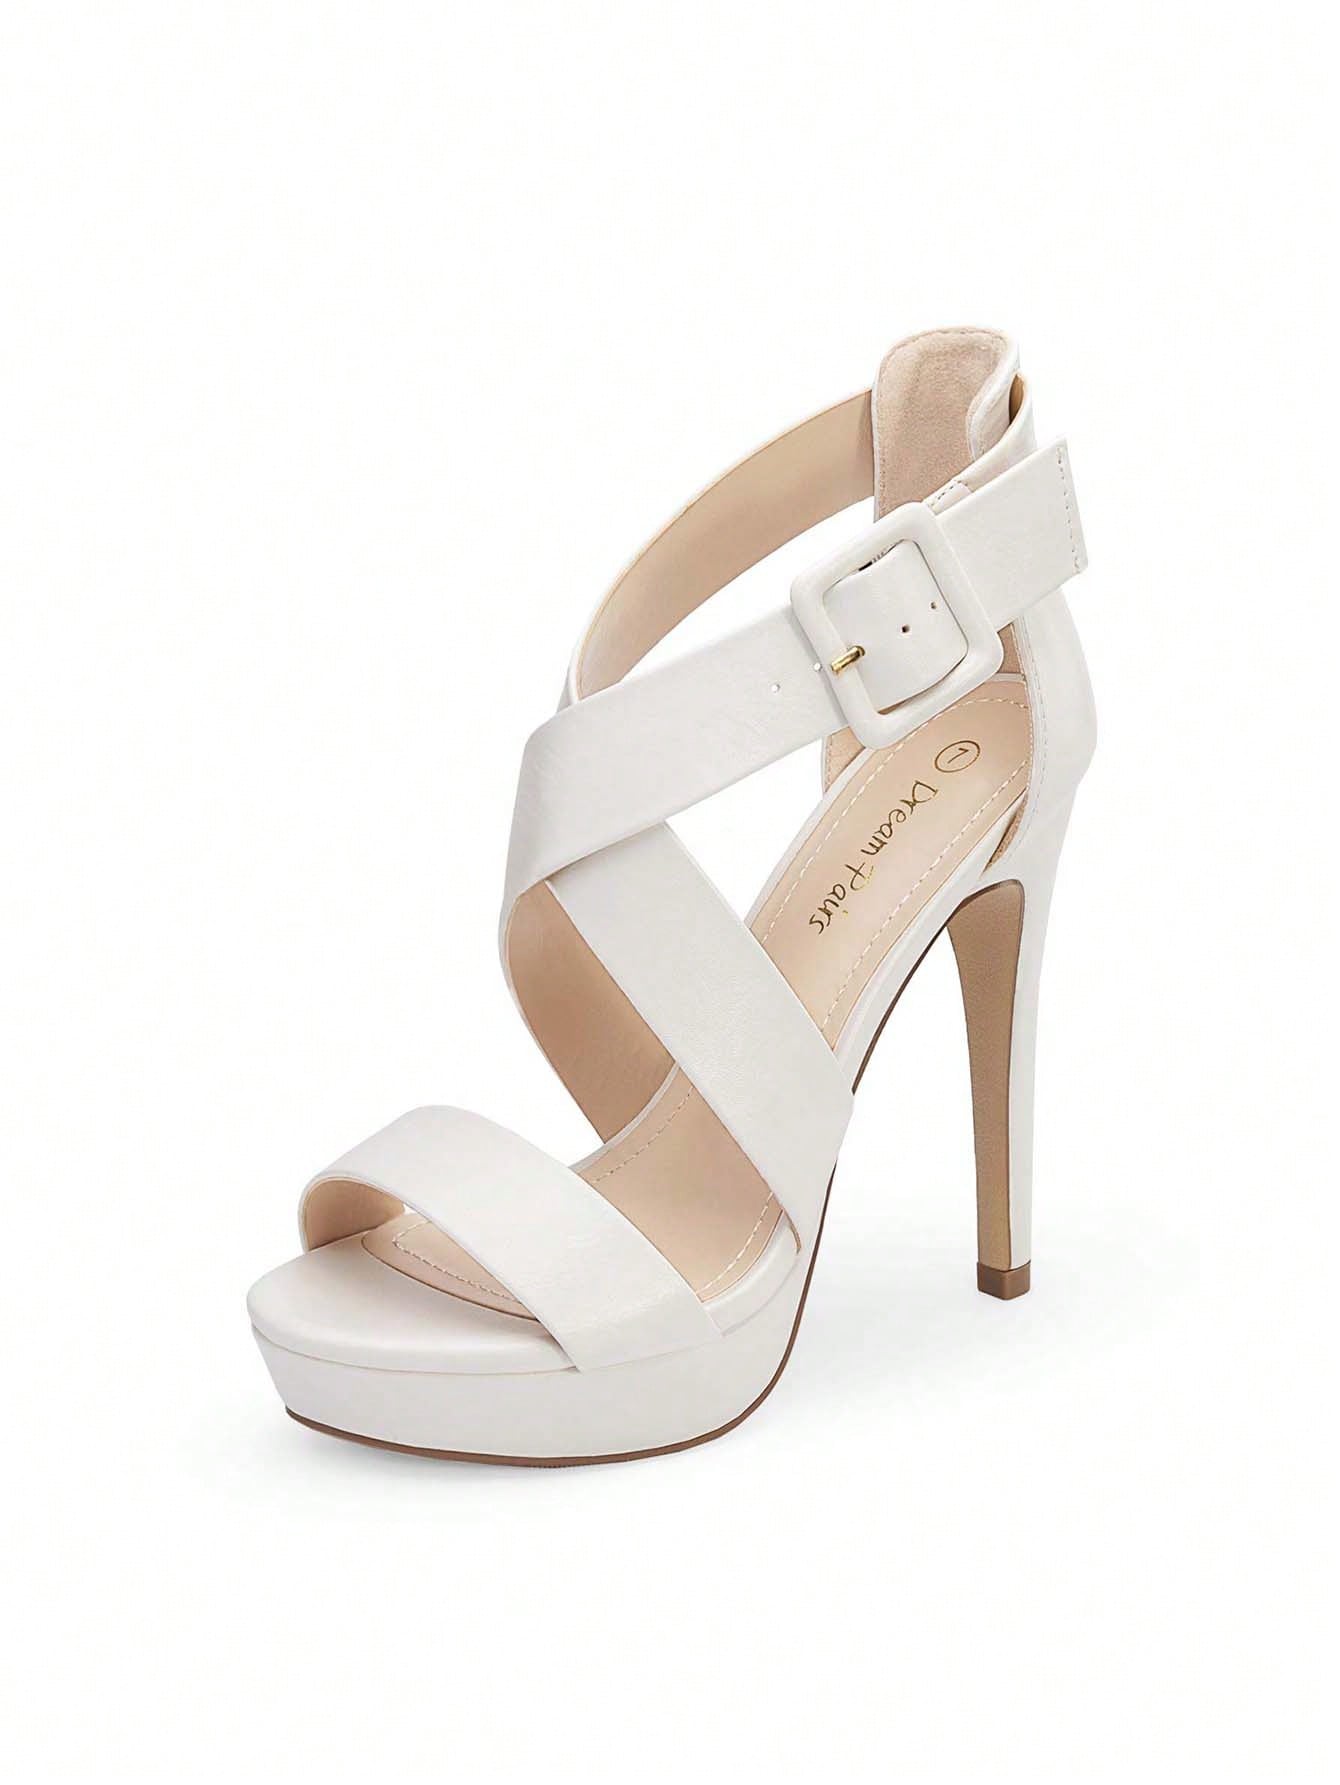 Fabulous Cross-Strap High Heel Sandals: Elevate Your Style and Confidence with These Stunning Platform Heels